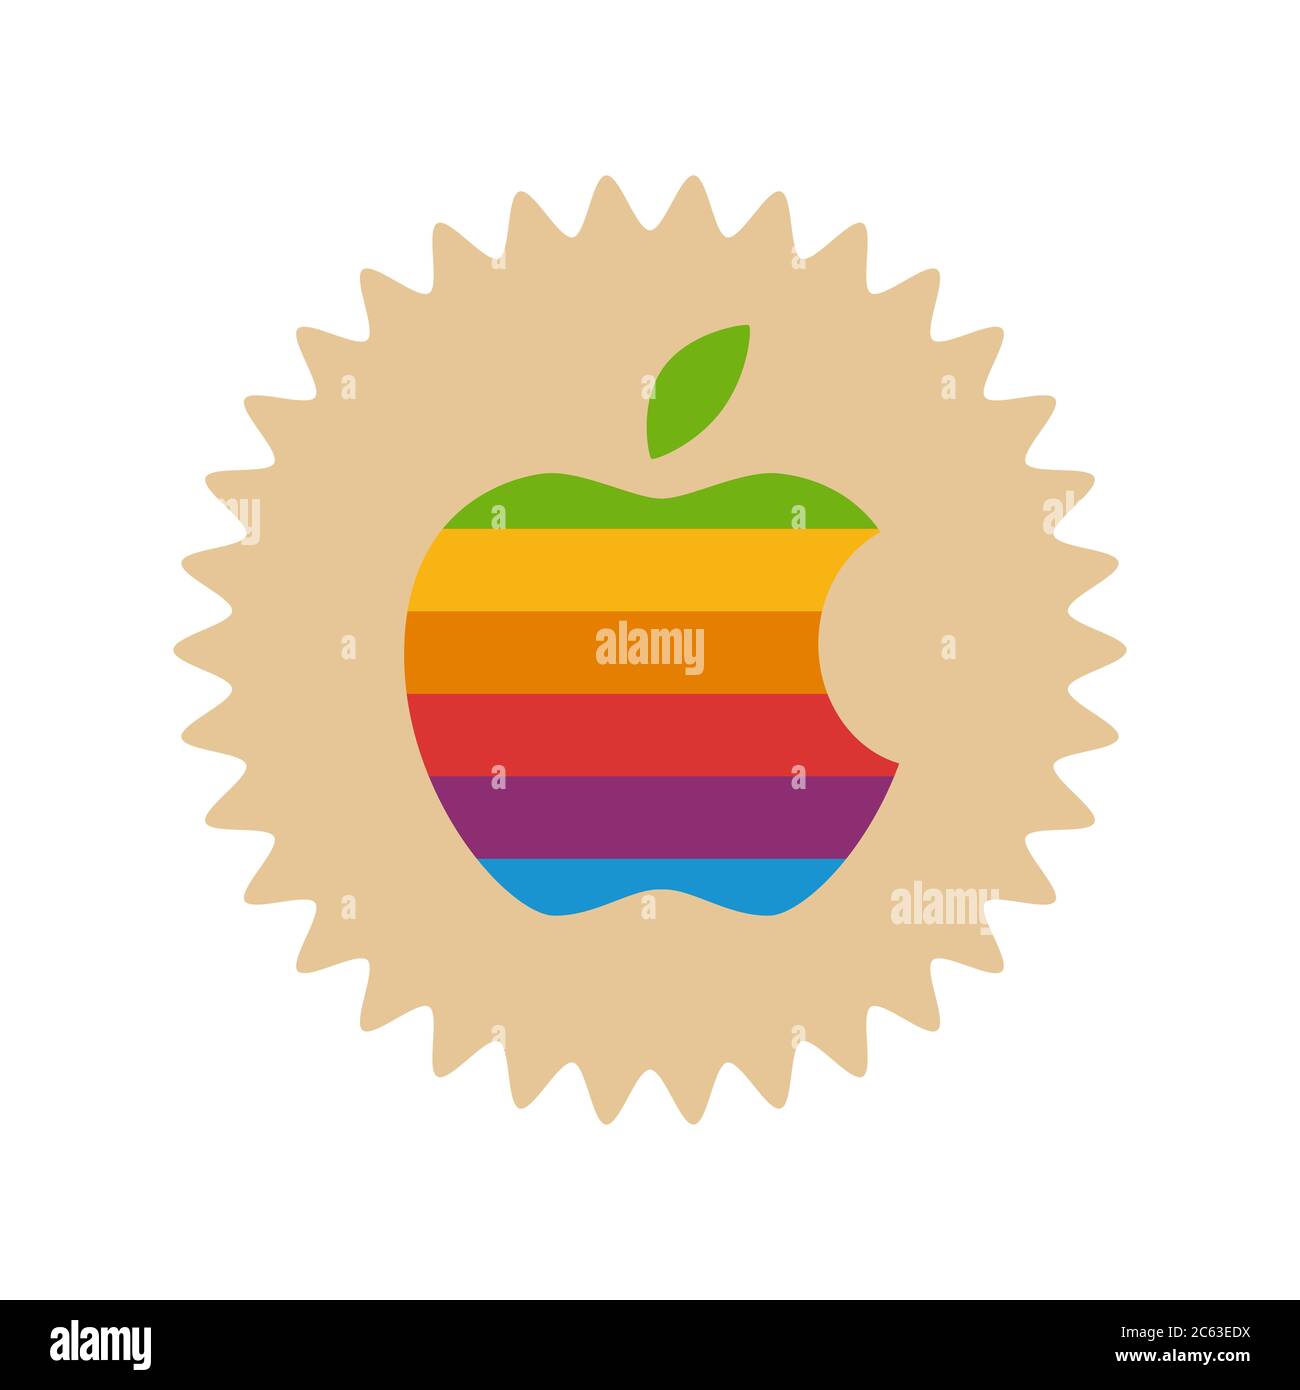 Apple logo. Apple is the technology company sells consumer electronics products headquartered in Cupertino California. Apple app . Kharkiv, Ukraine - Stock Photo